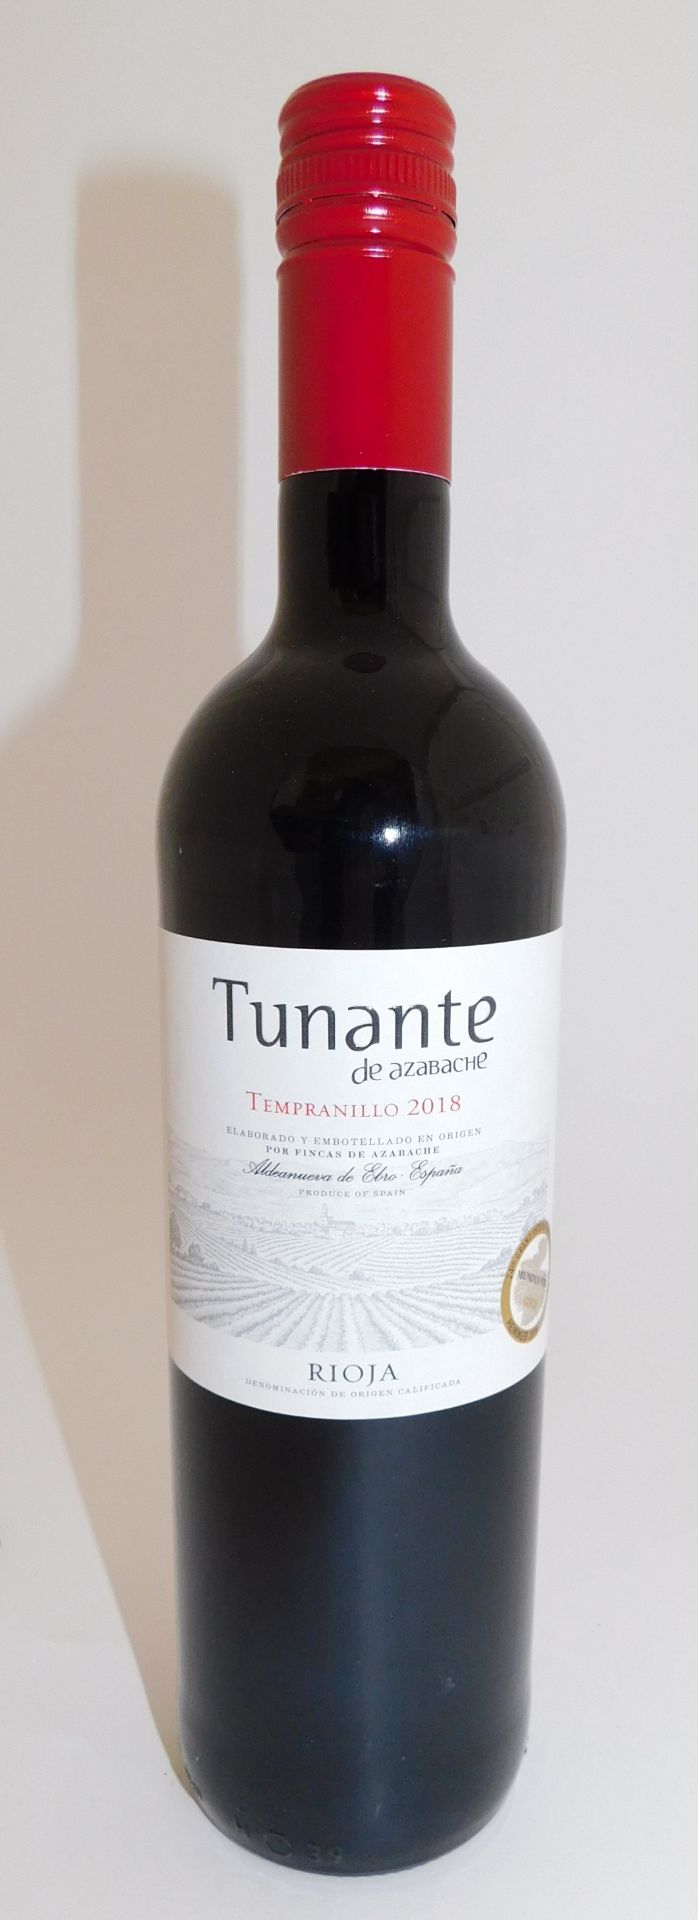 24 Bottles of Turnate de Azabache Tempranilllo 2018 Rioja, 75cl (Located Stockport – See General